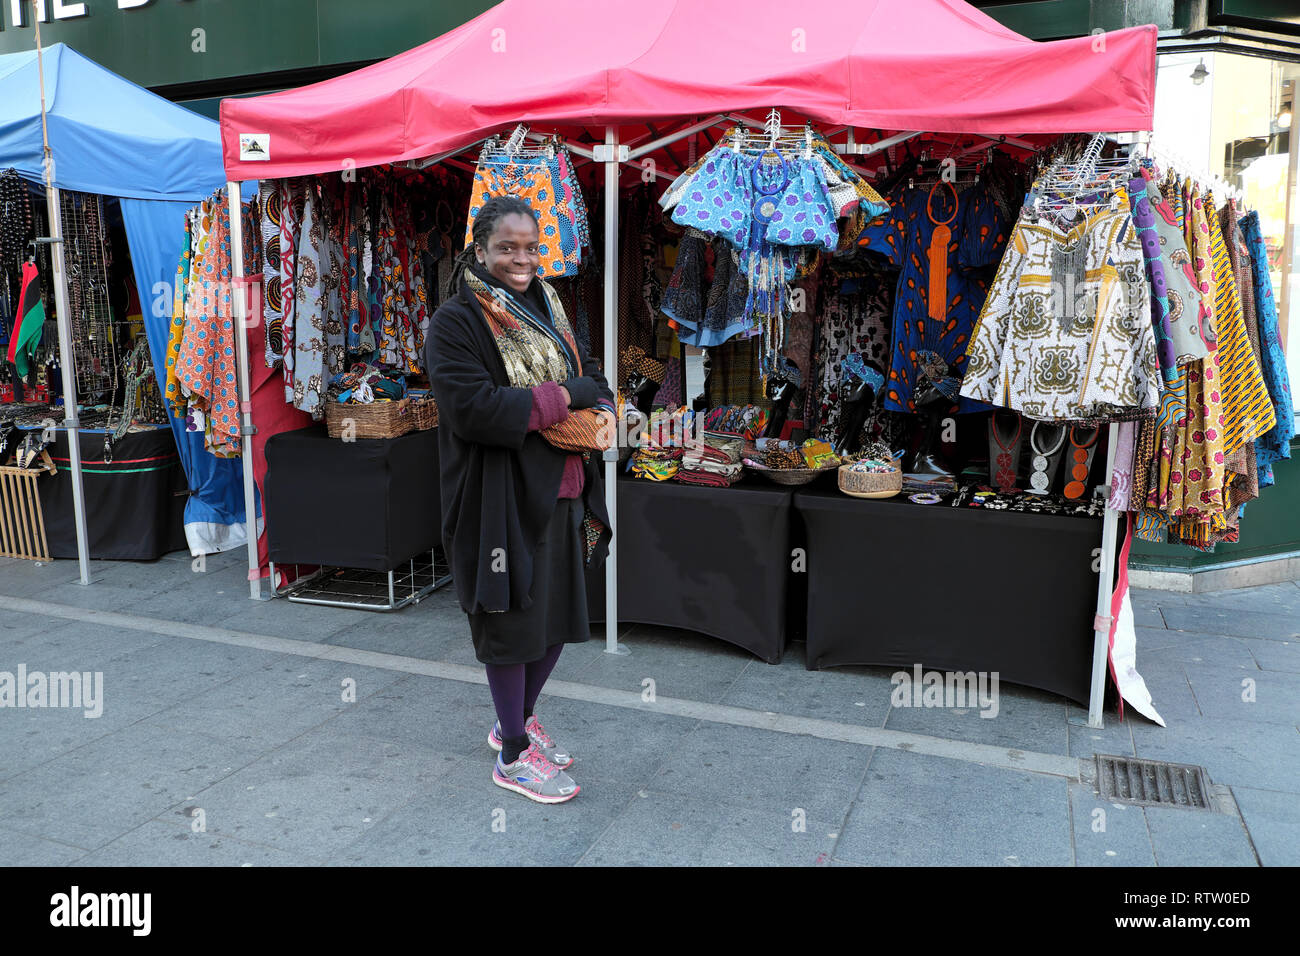 A smiling woman selling African textiles, clothing and jewellery at a street market stall on Brixton Road in Brixton South London UK  KATHY DEWITT Stock Photo